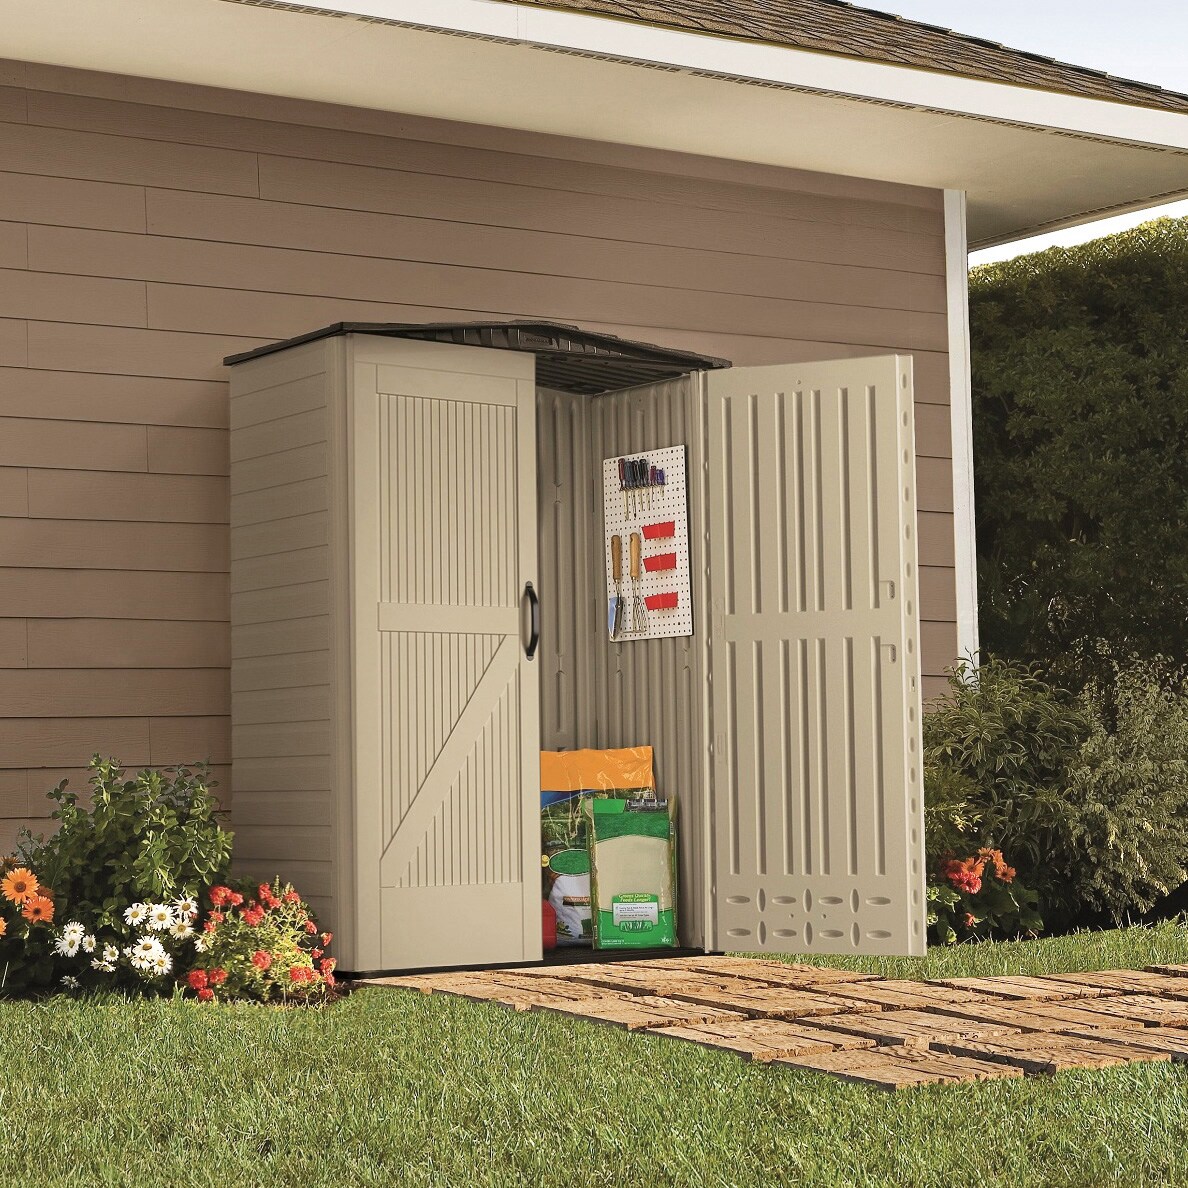  Rubbermaid Medium Vertical Resin Outdoor Storage Shed, 4 x 2.5  ft., Gray and Brown, Space-Saving, for Home/Garden/Pool/Back-Yard/Lawn  Equipment/Patio : Patio, Lawn & Garden